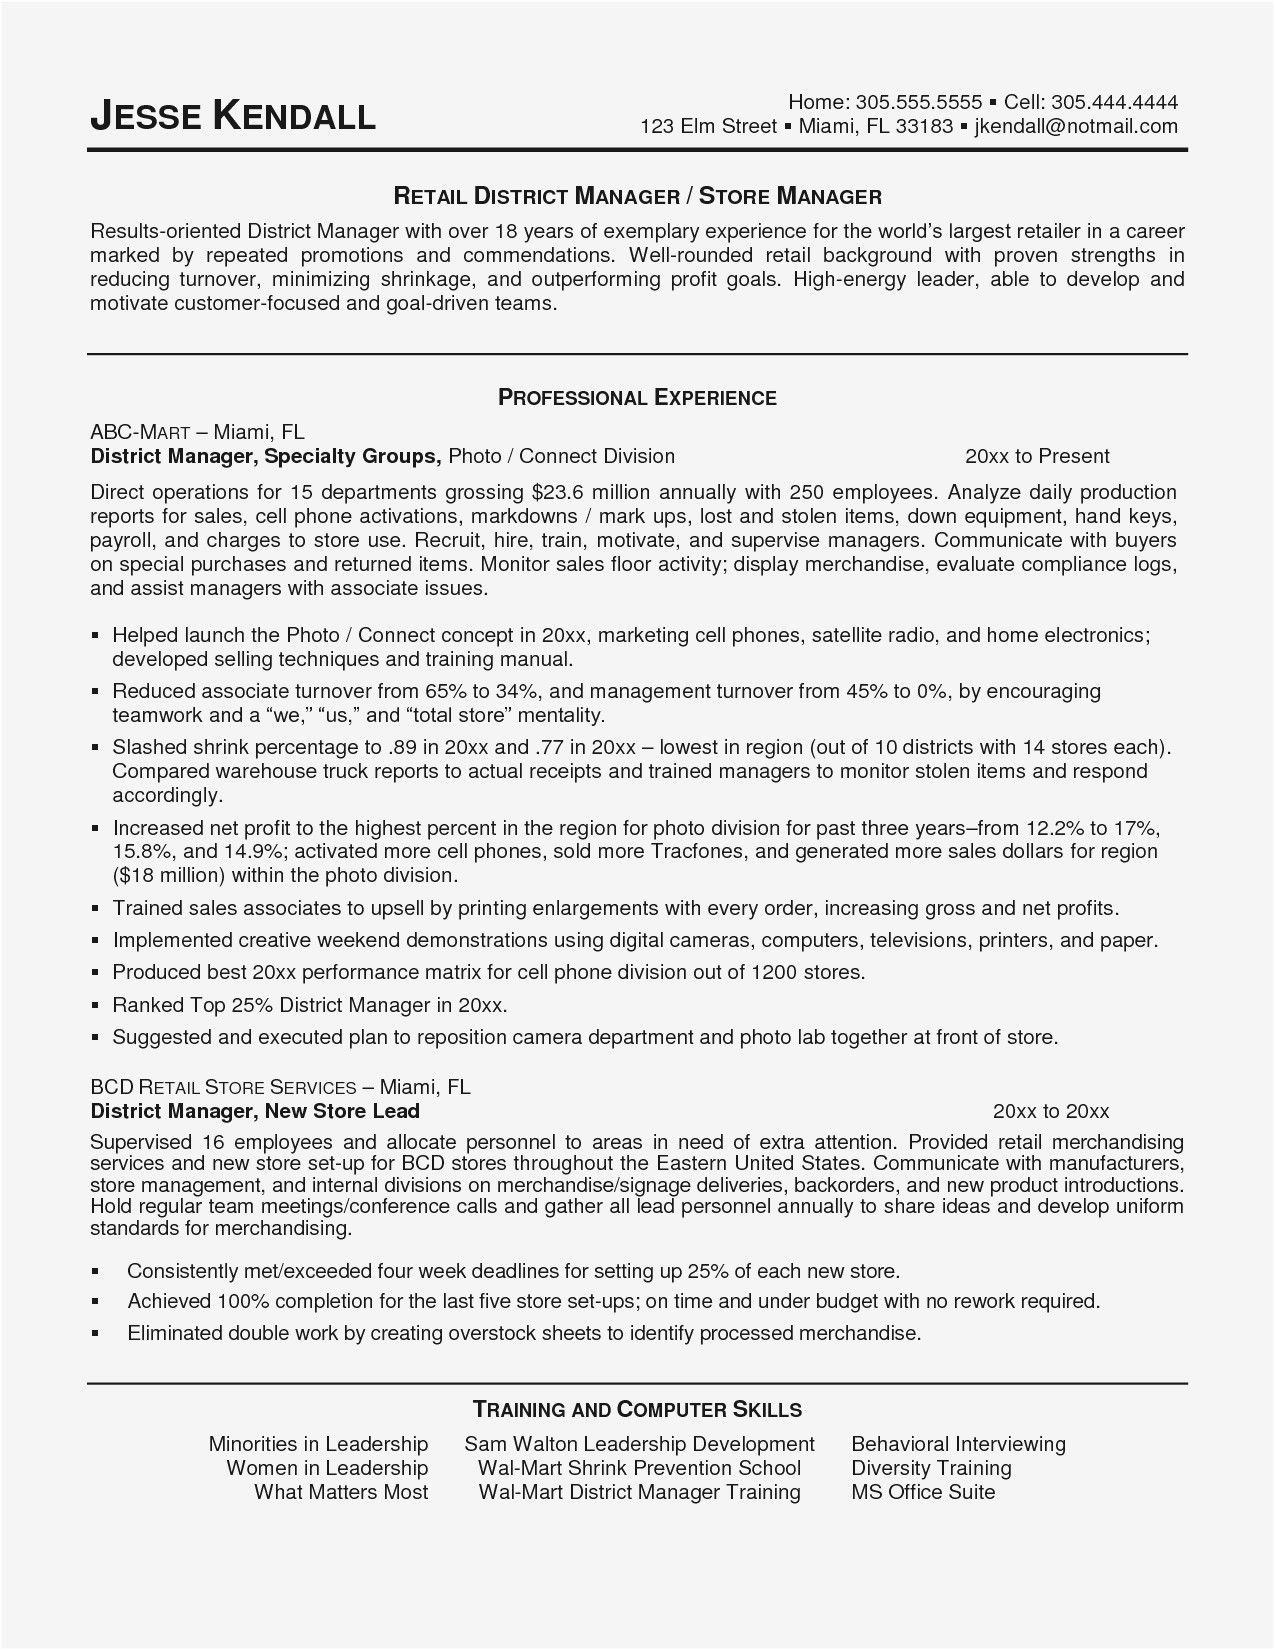 Sample Resume Objective for Masters Program Statement Purpose Sample for Masters Degree